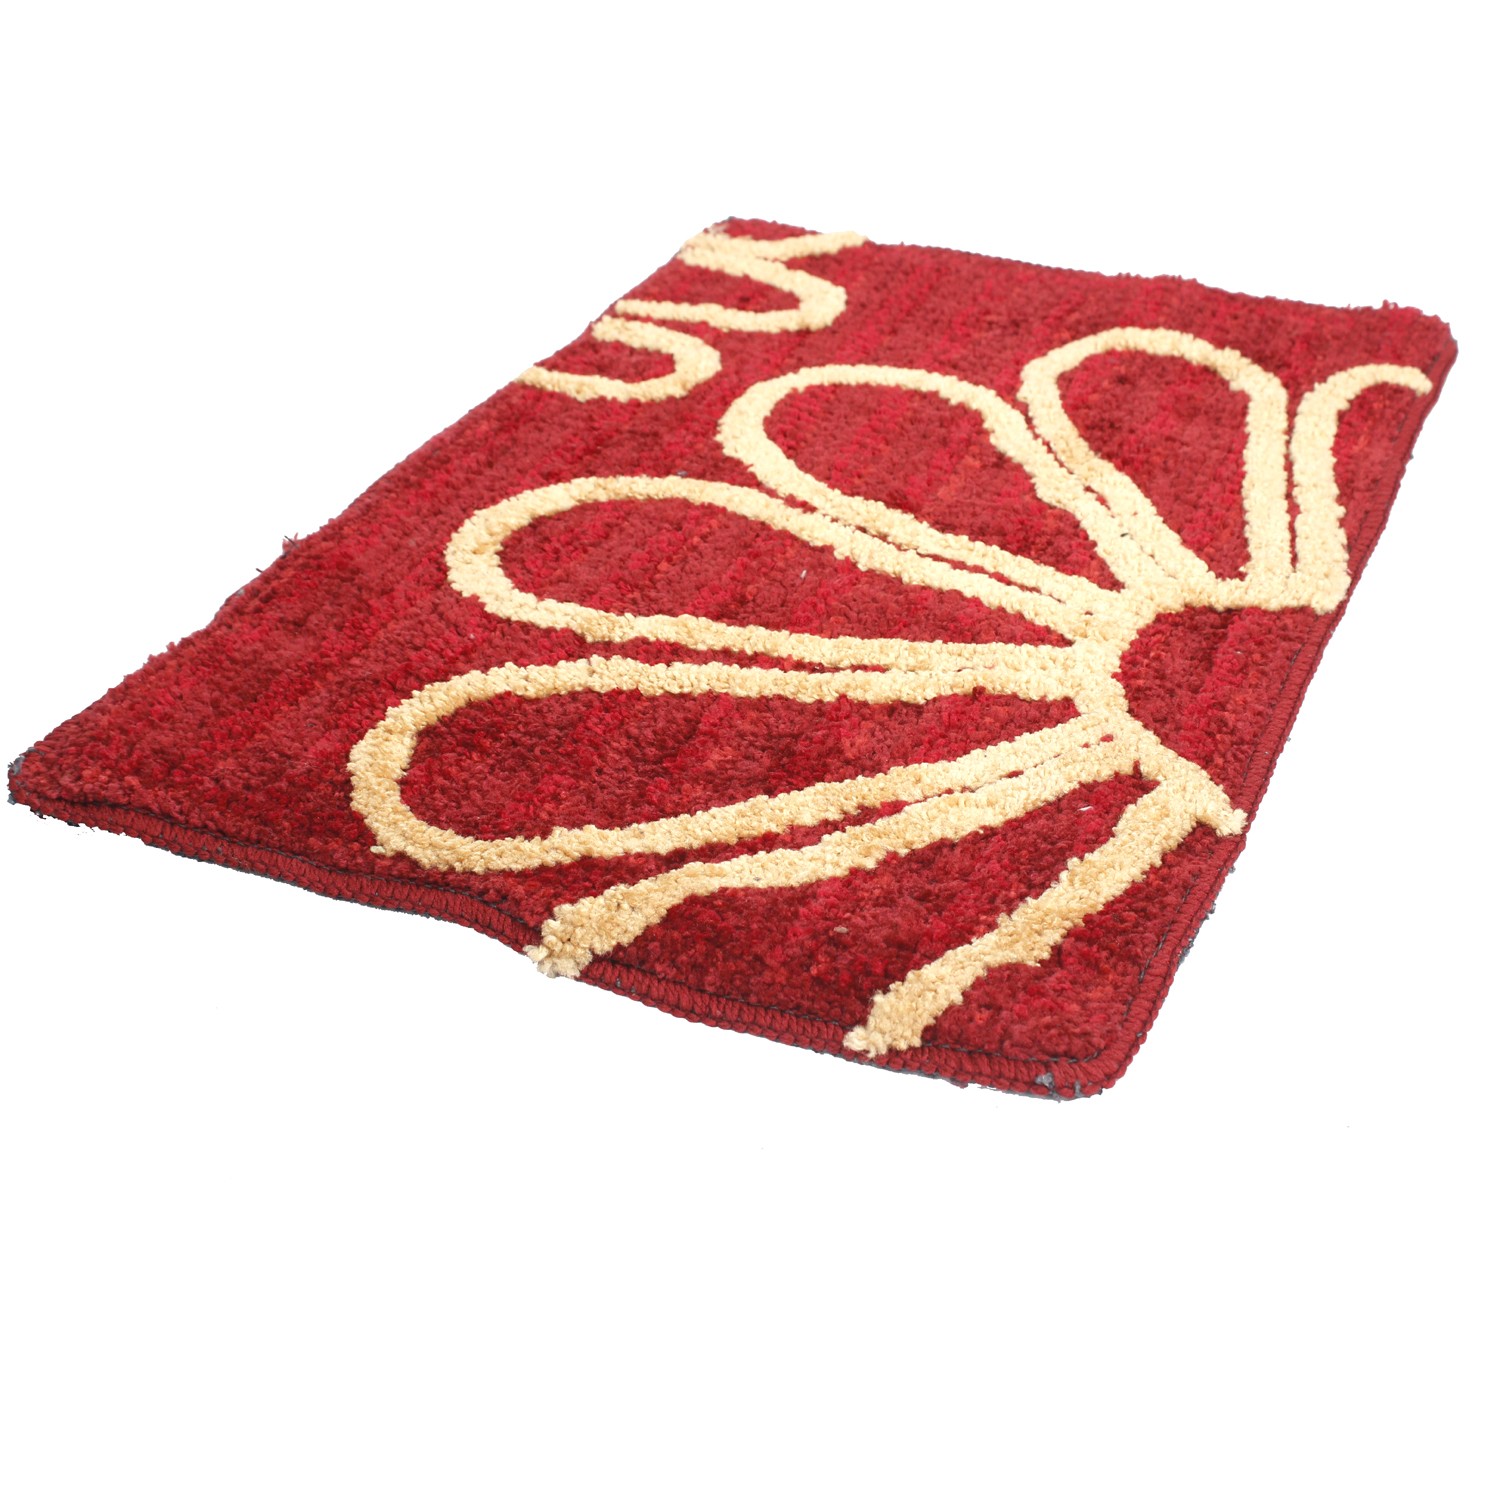 Door Mat Red Anti-Slip Living Room Bath Room Quick Drying Absorbent Mat for Home and Kitchen | Size (60cm x 40cm) | Flower Design | Red Color